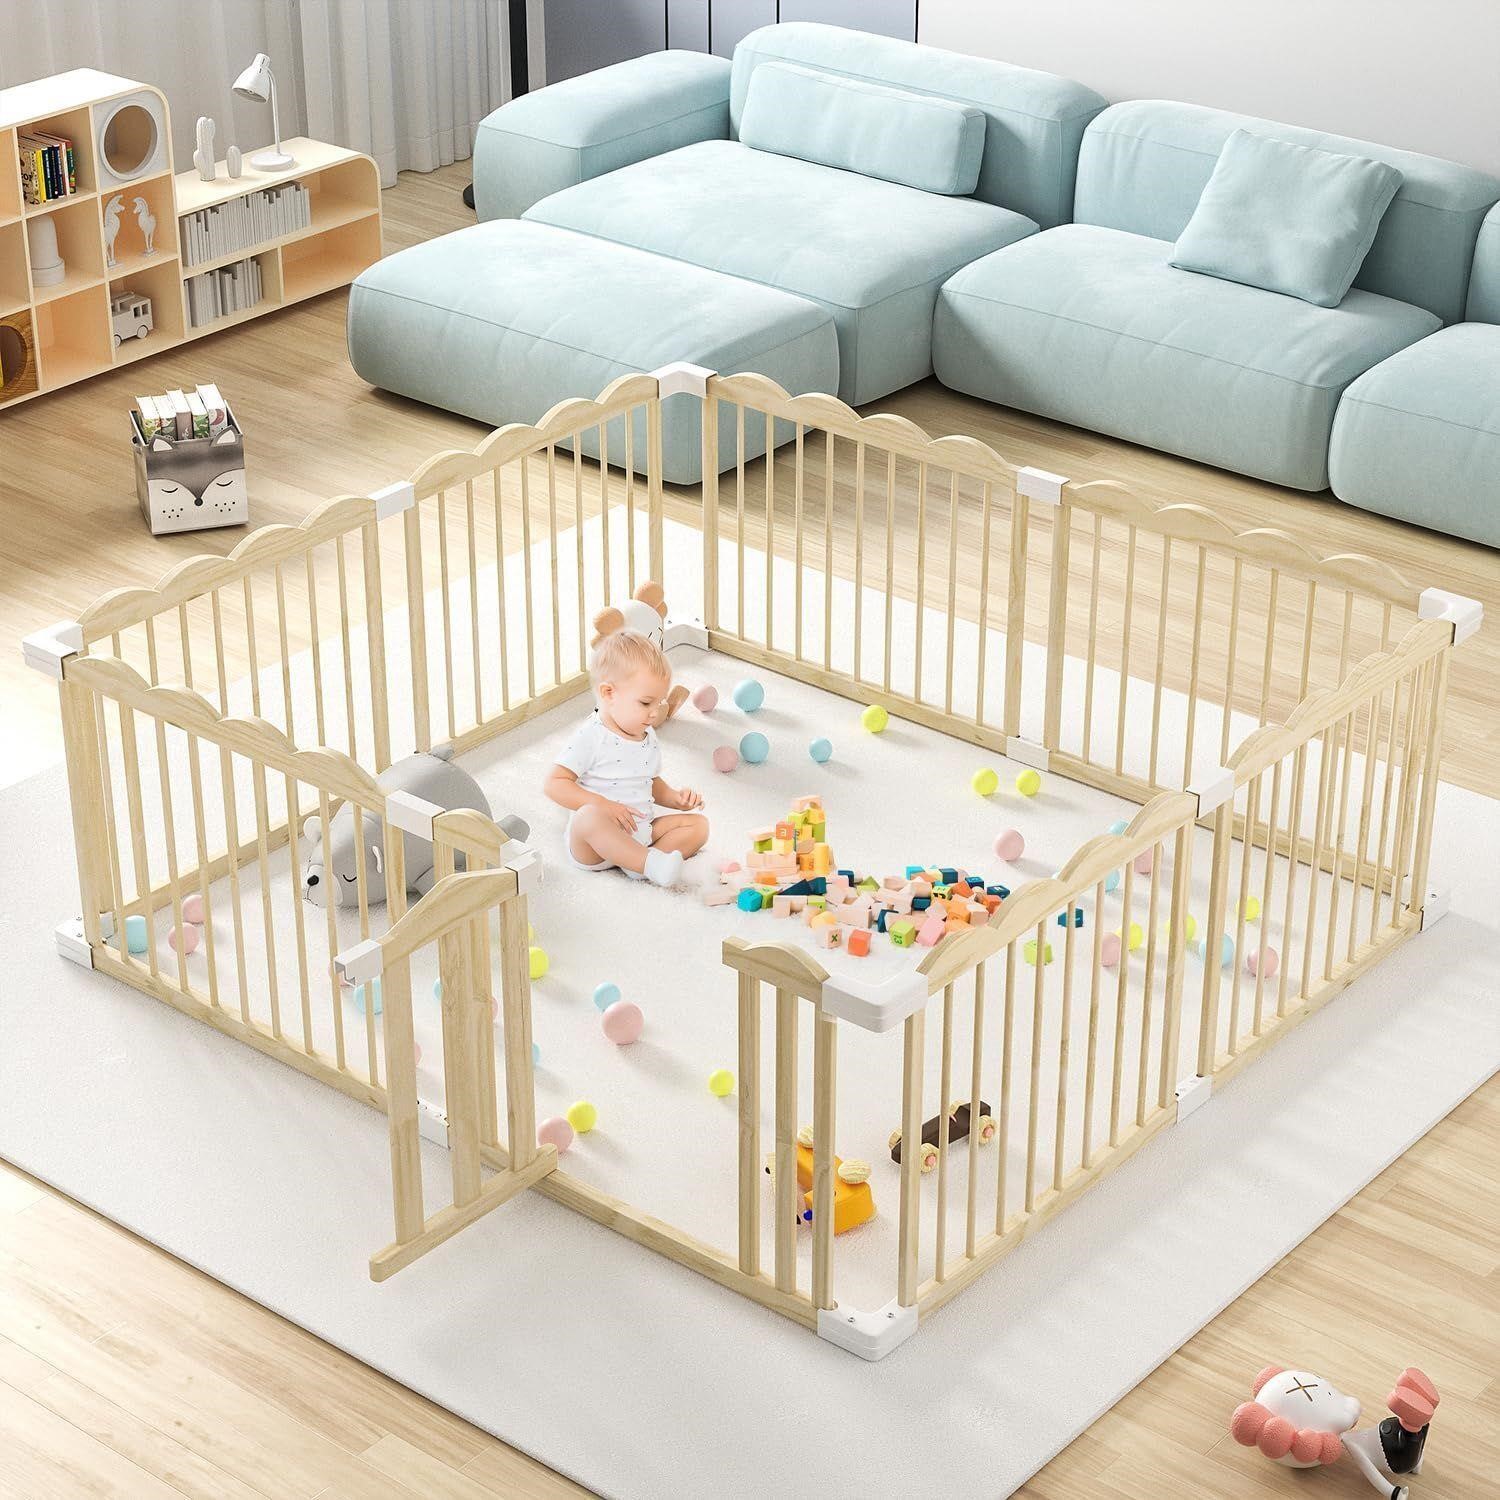 $159 - Kocini Wooden Playpen for Babies and Toddle